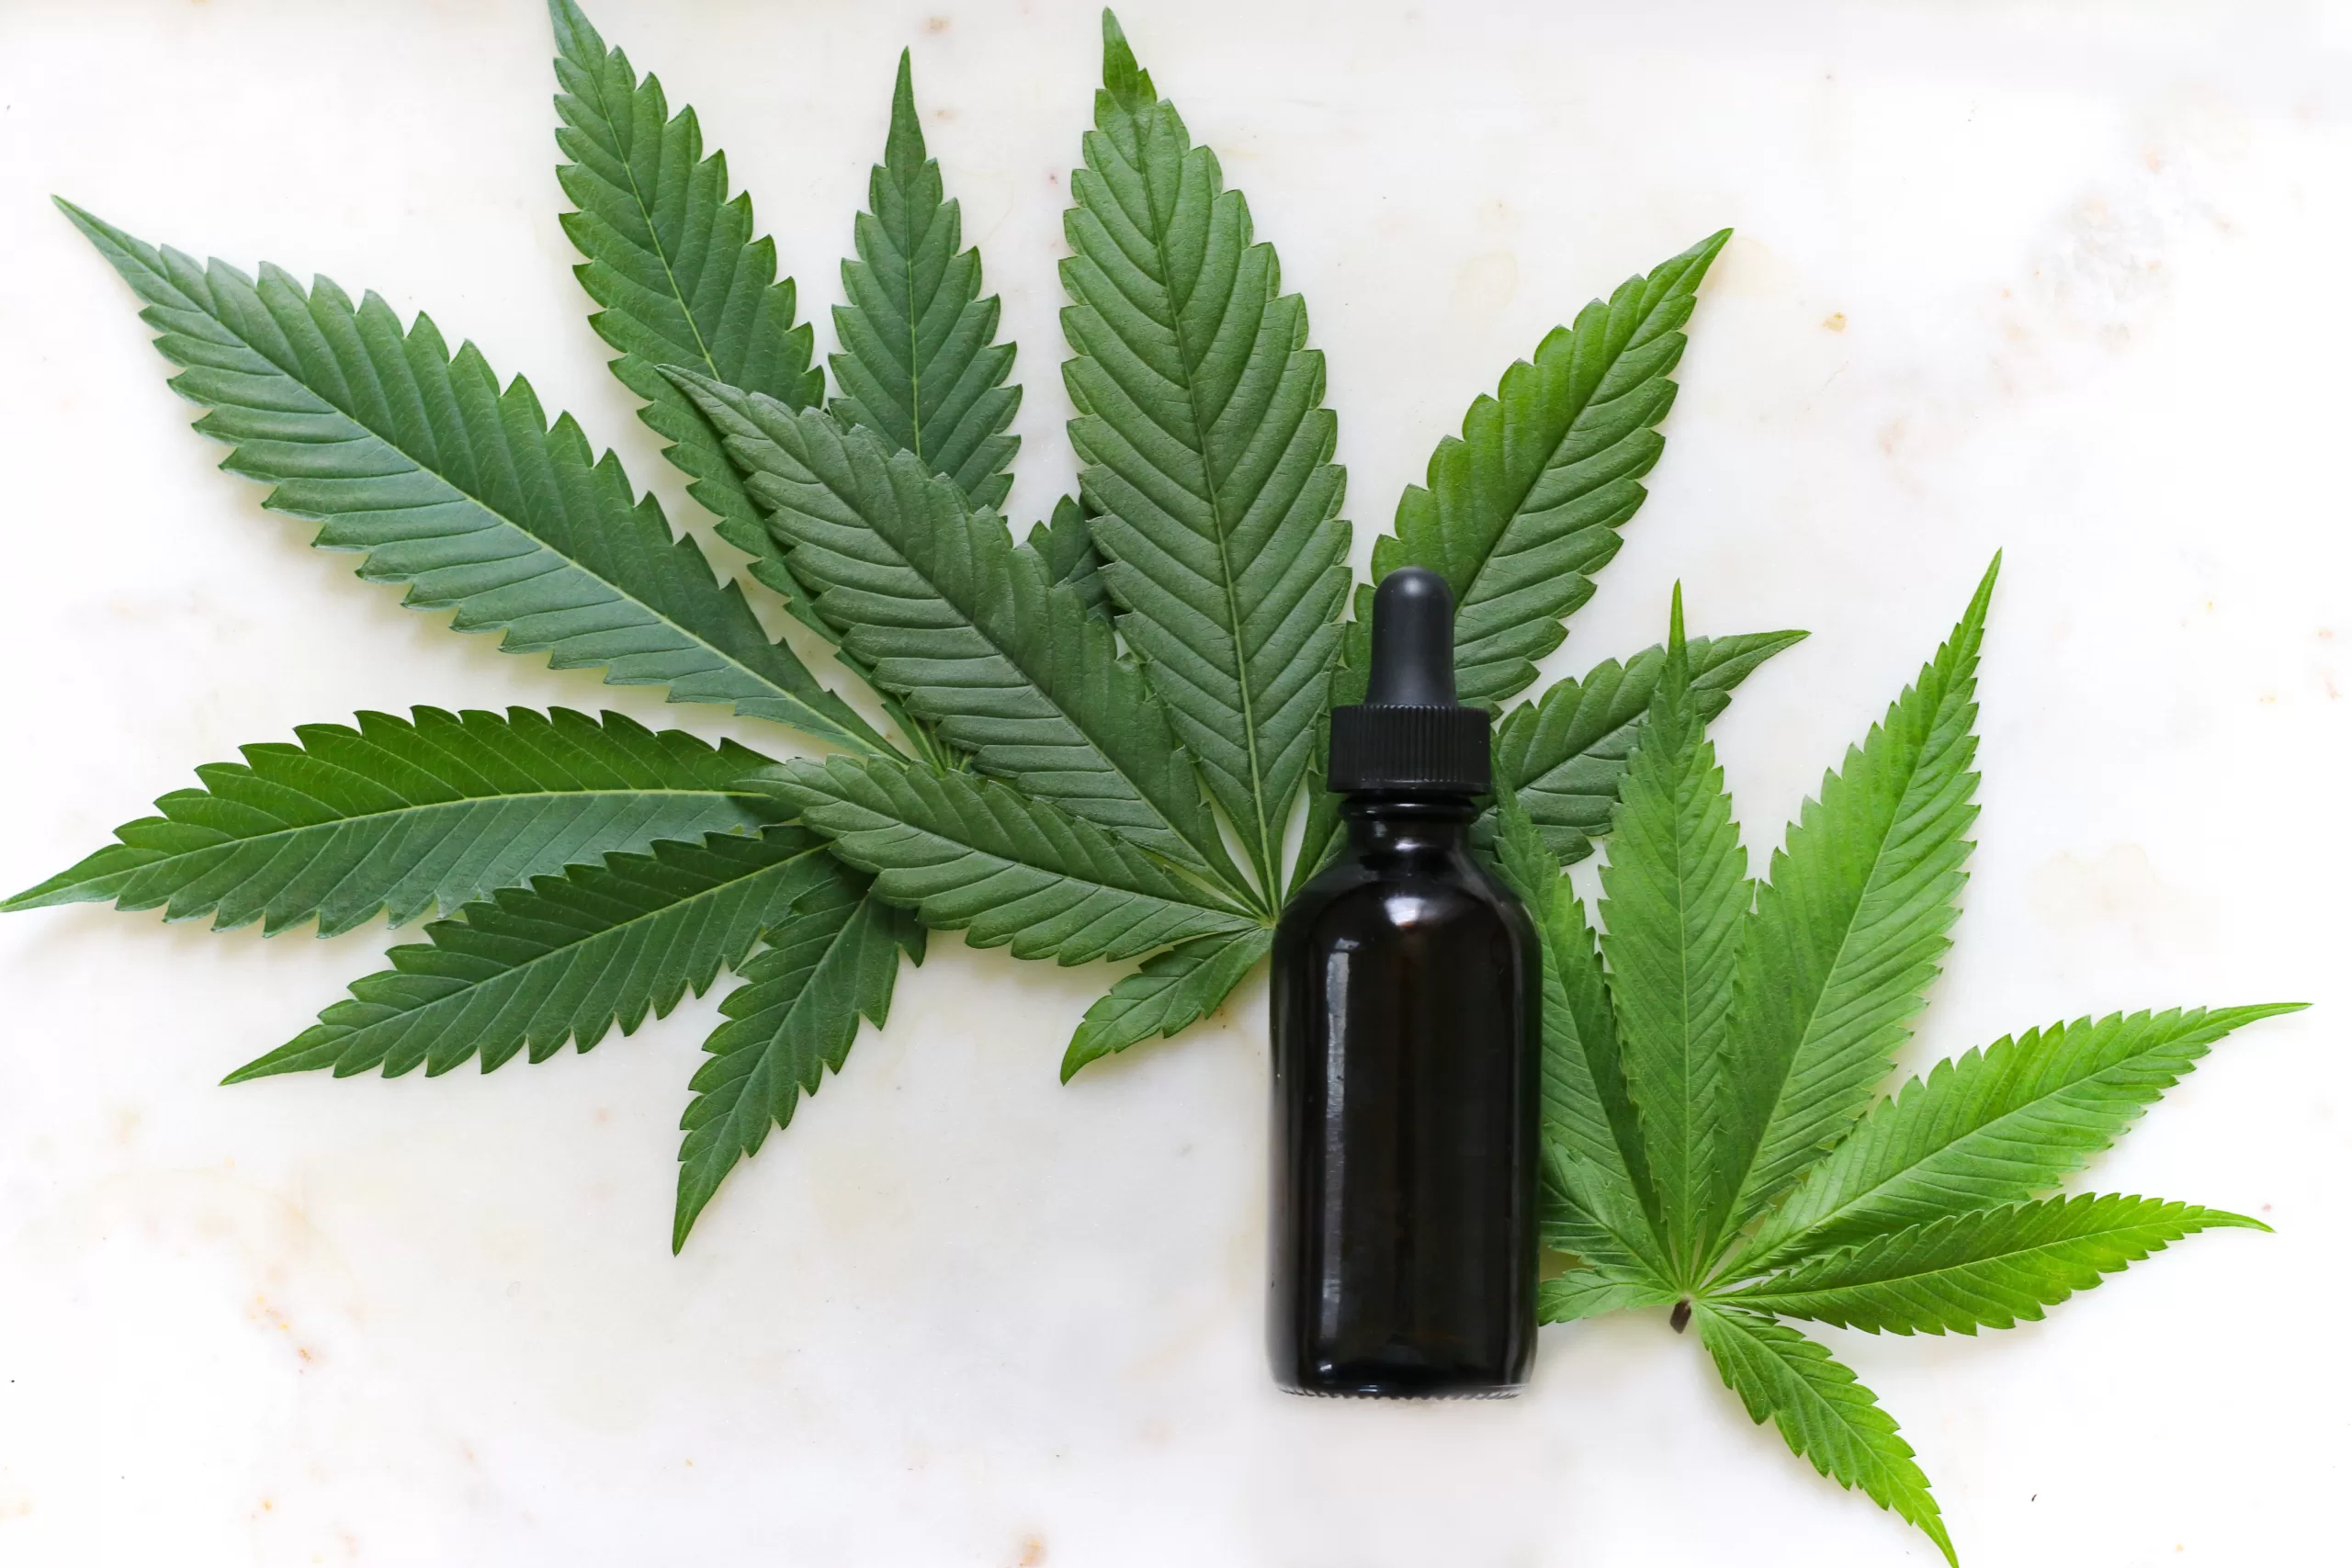 Cannabinoids Series: CBD has medicinal properties that are being studied by medical science researchers.